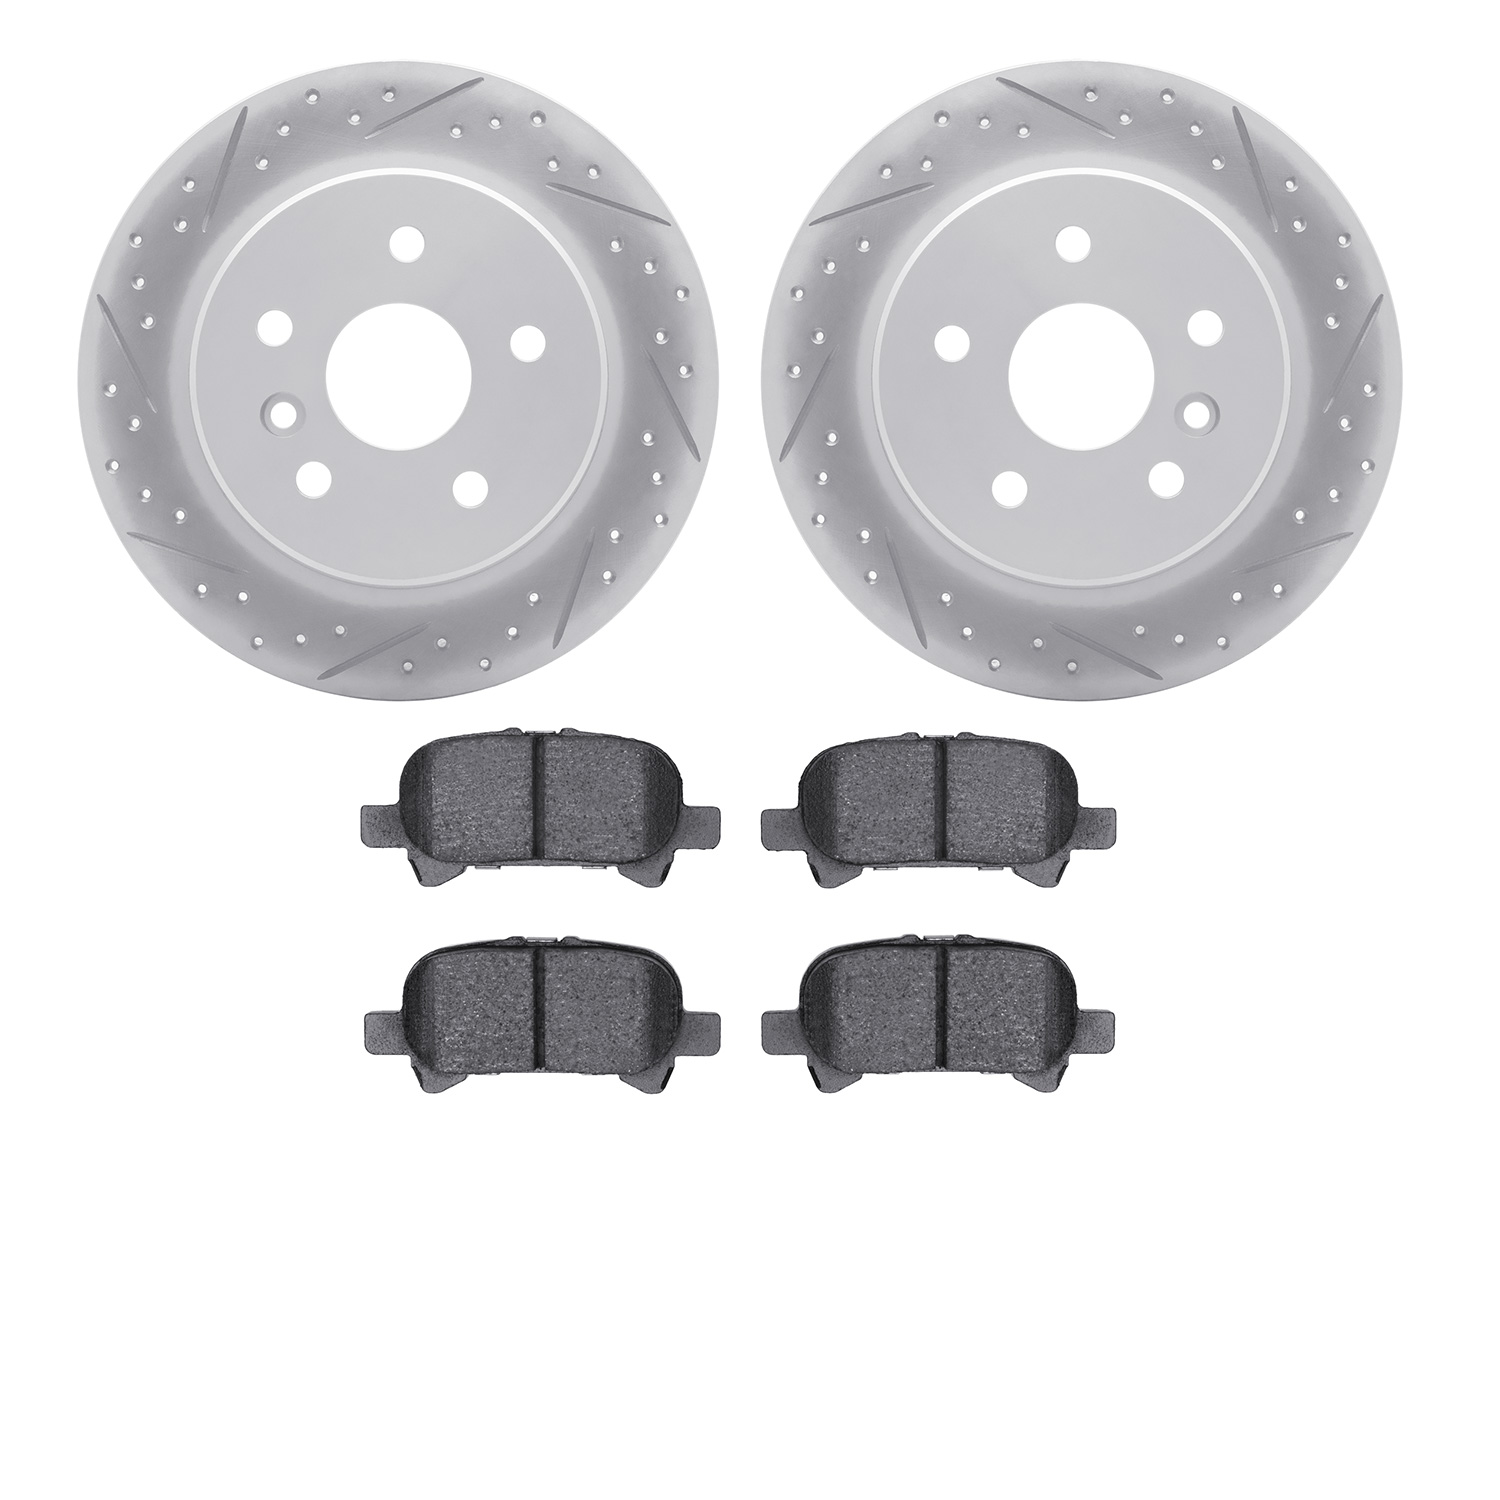 2502-76017 Geoperformance Drilled/Slotted Rotors w/5000 Advanced Brake Pads Kit, 2000-2004 Lexus/Toyota/Scion, Position: Rear